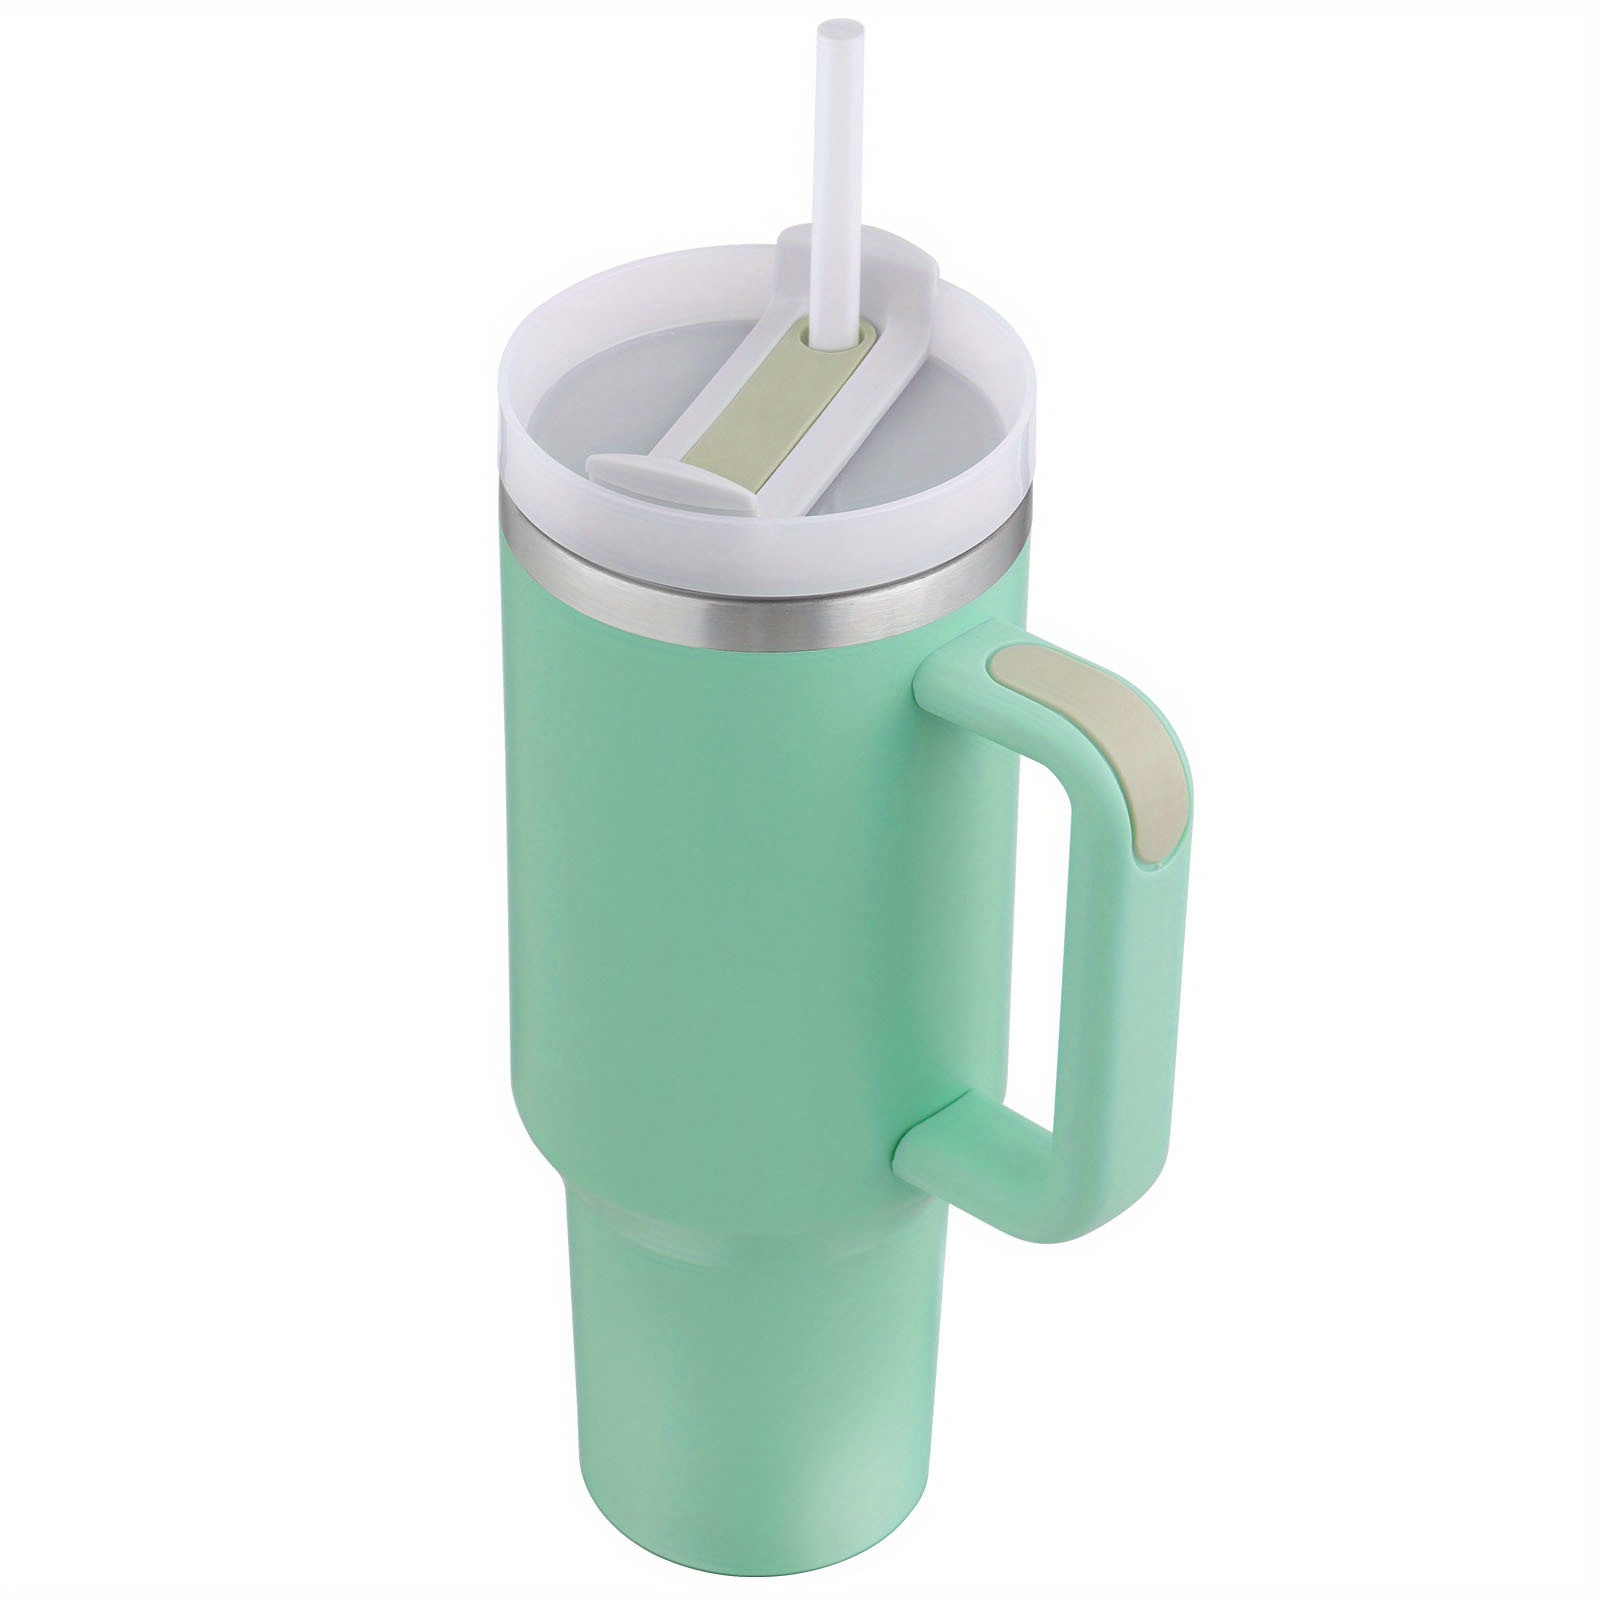 40 Oz Tumbler with Handle and Straw Lid Insulated Reusable  Stainless Steel Water Bottle Travel Mug Iced Coffee Cup Stanley Cup (Light  Green): Tumblers & Water Glasses